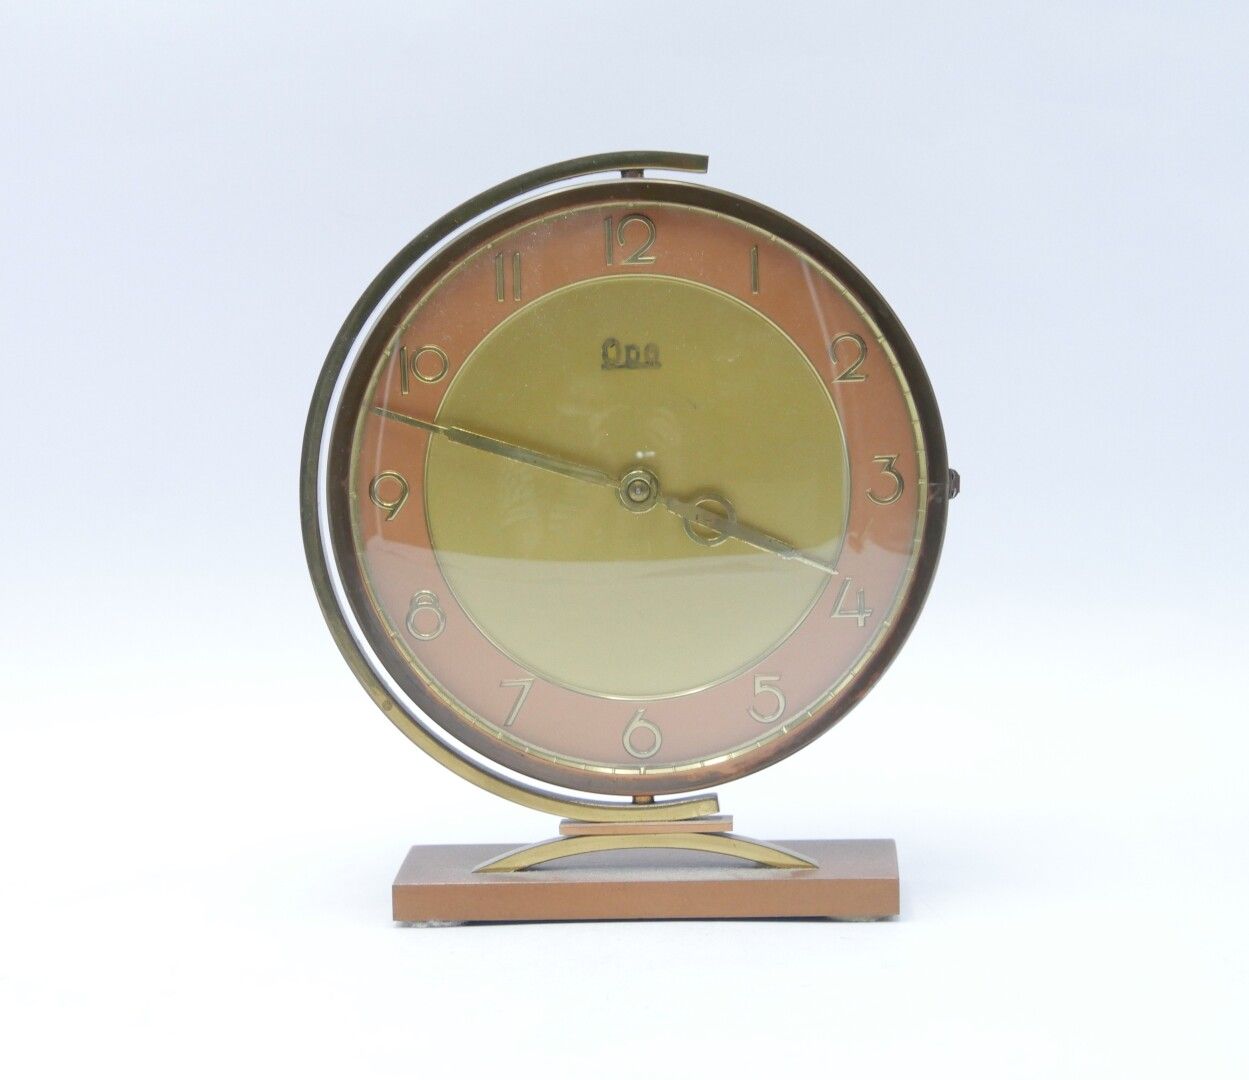 Null ODO - Circa 1940 

Gilt metal desk clock with a pivoting dial with Arabic n&hellip;